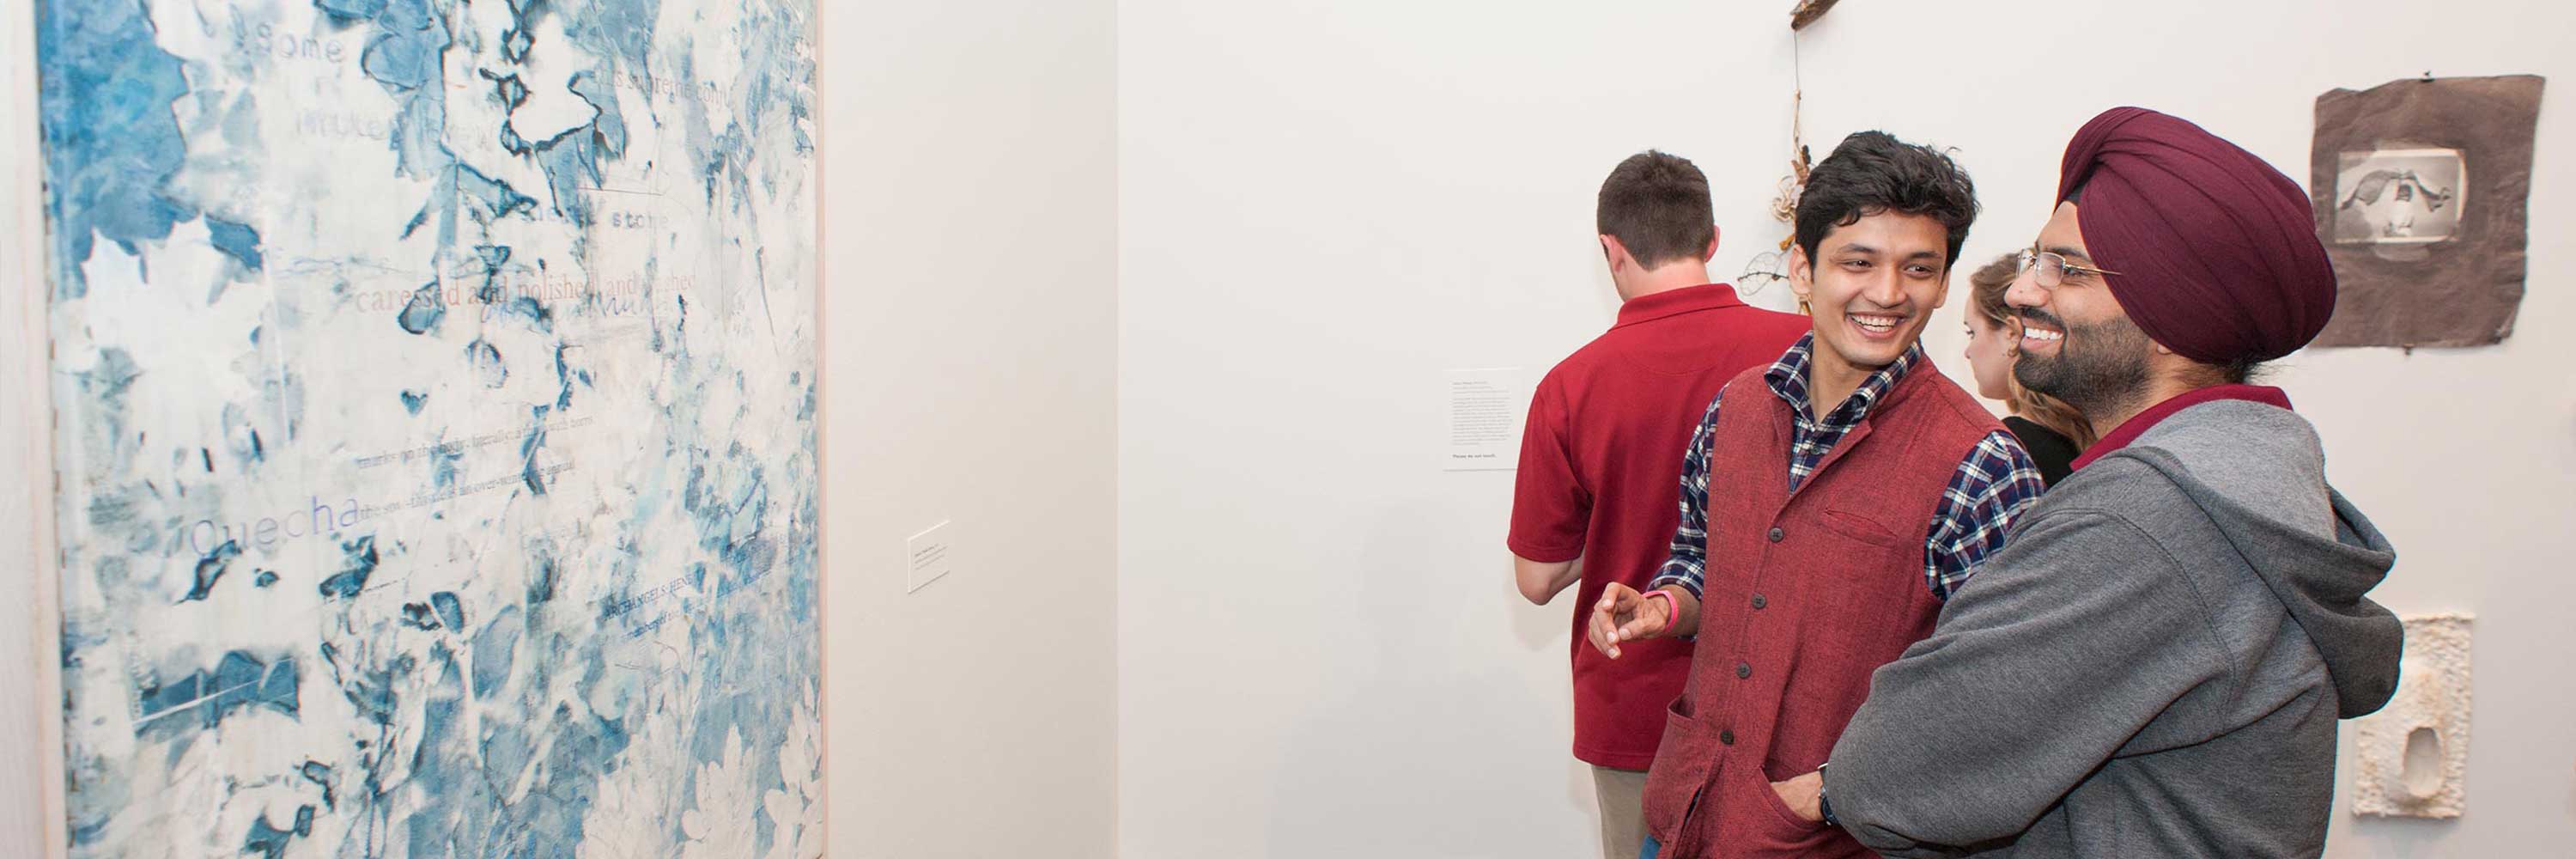 Young men stand in a gallery, smiling at each other